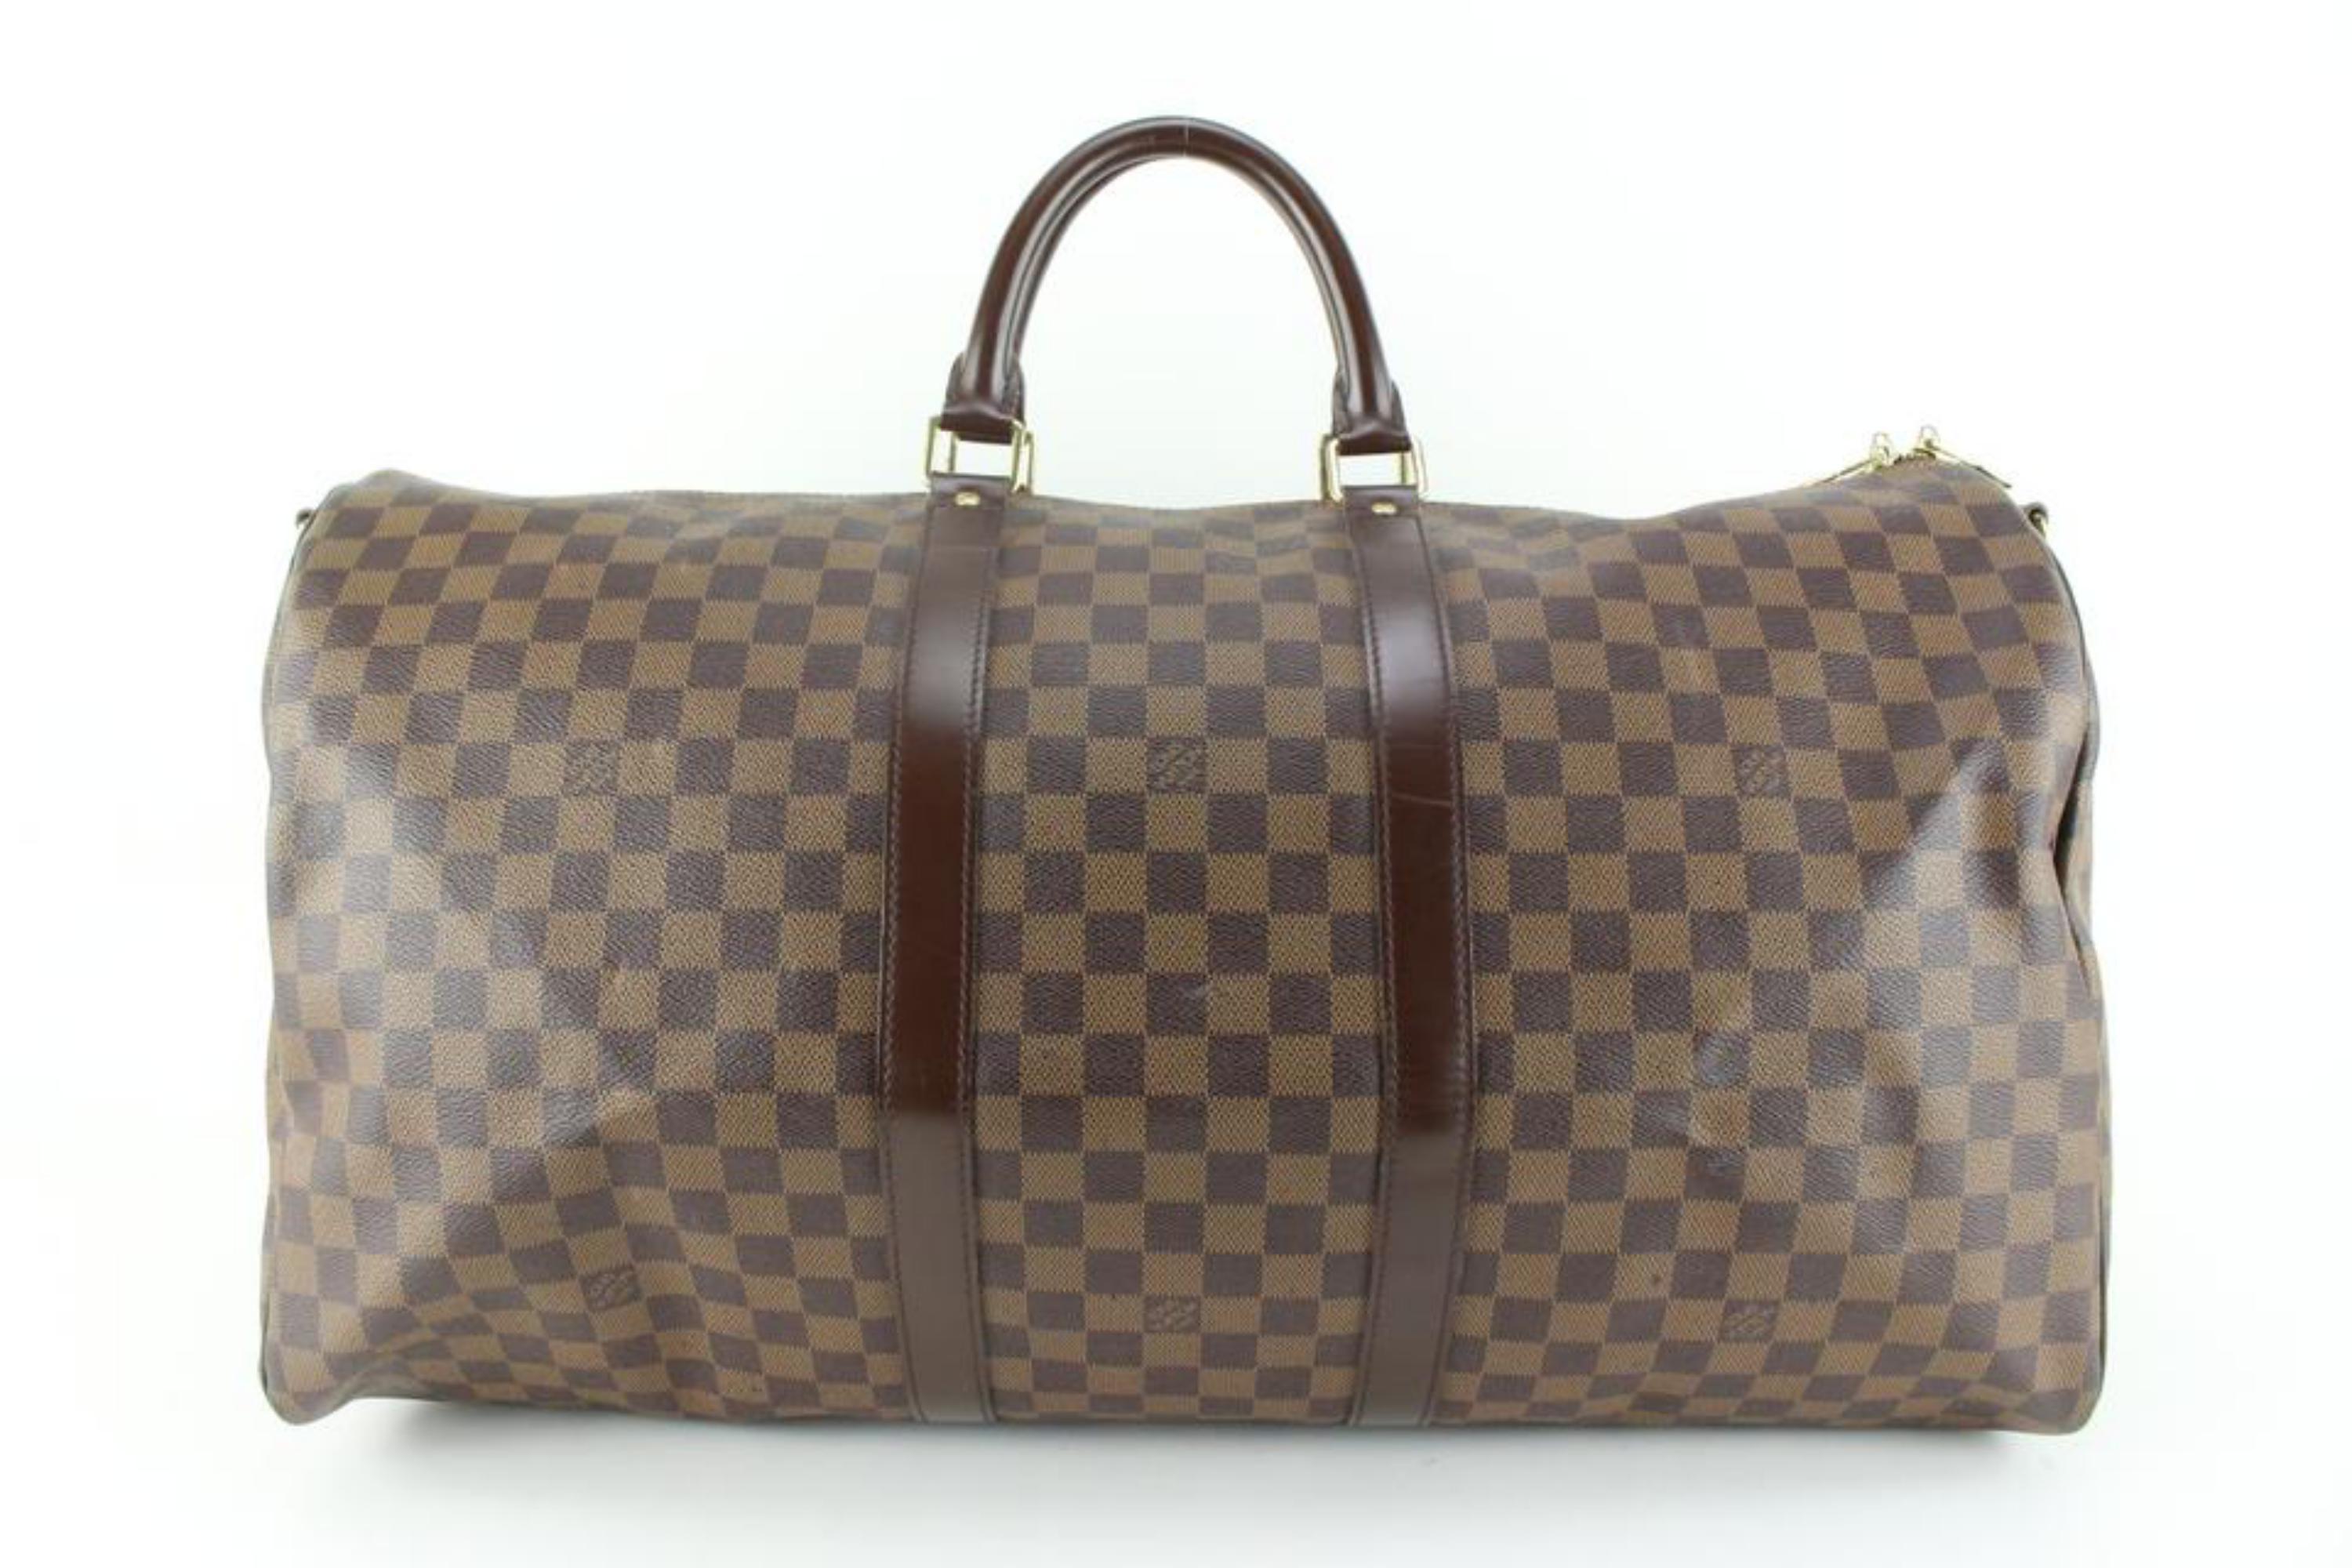 Louis Vuitton Damier Ebene Keepall Bandouliere 55 Duffle Bag with Strap 99lk729s In Good Condition For Sale In Dix hills, NY